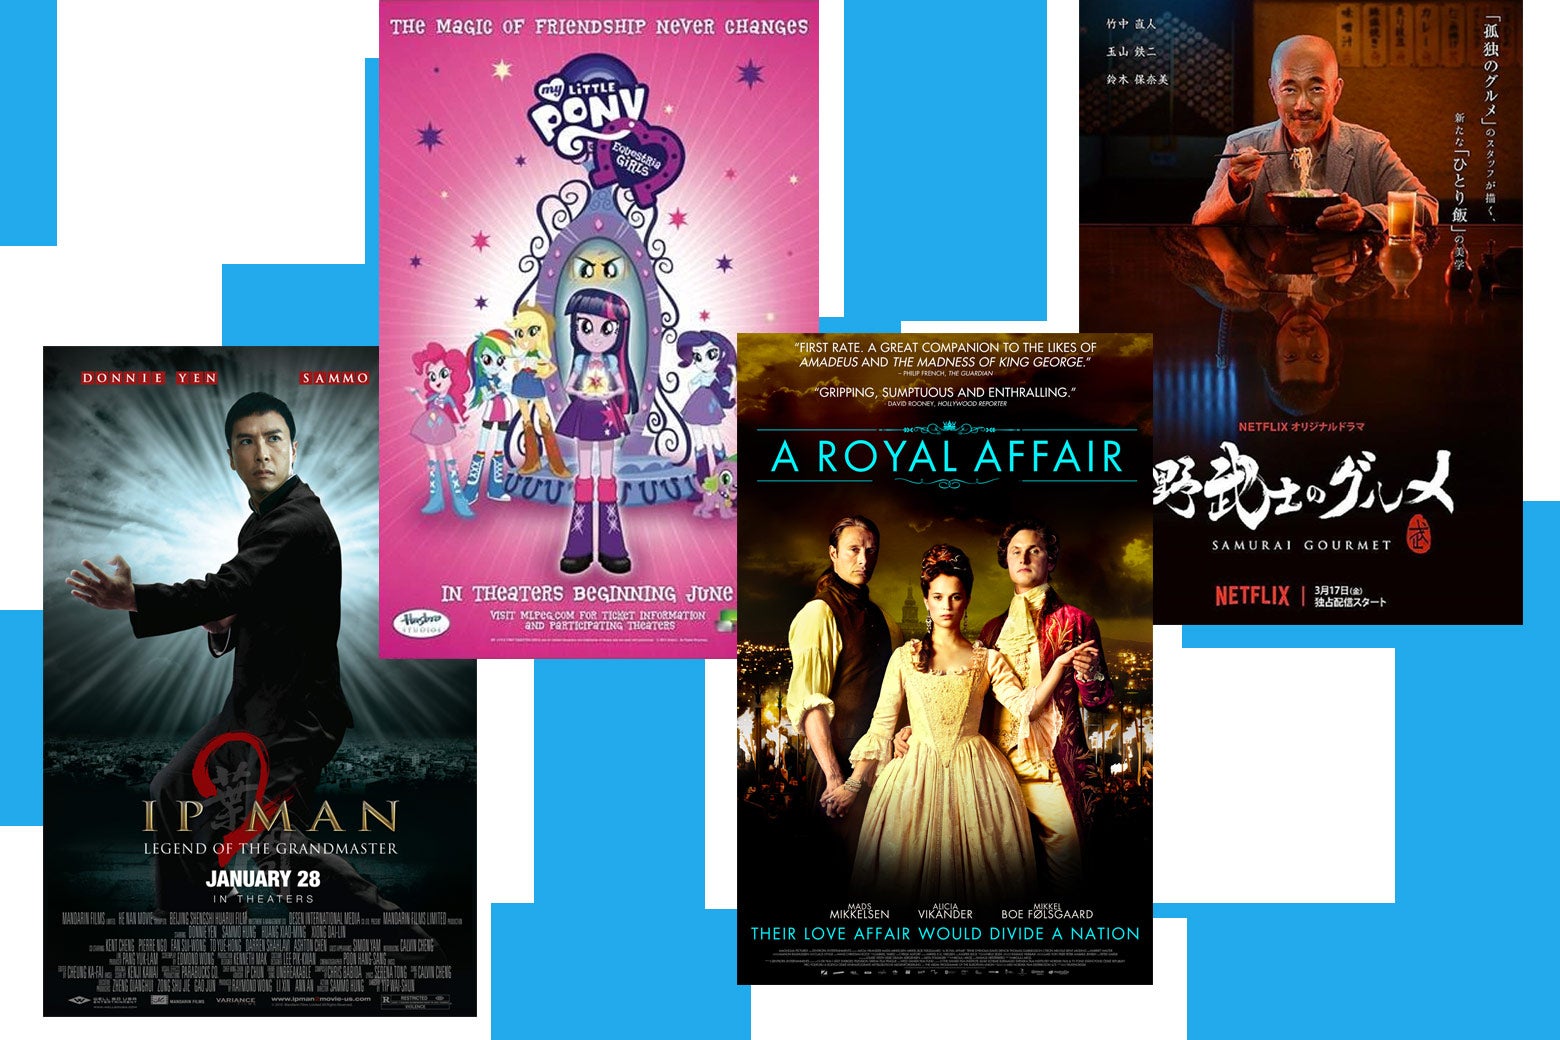 Movie posters for Ip Man 2, My Little Pony: Equestria Girls, A Royal Affair, and Samurai Gourmet.